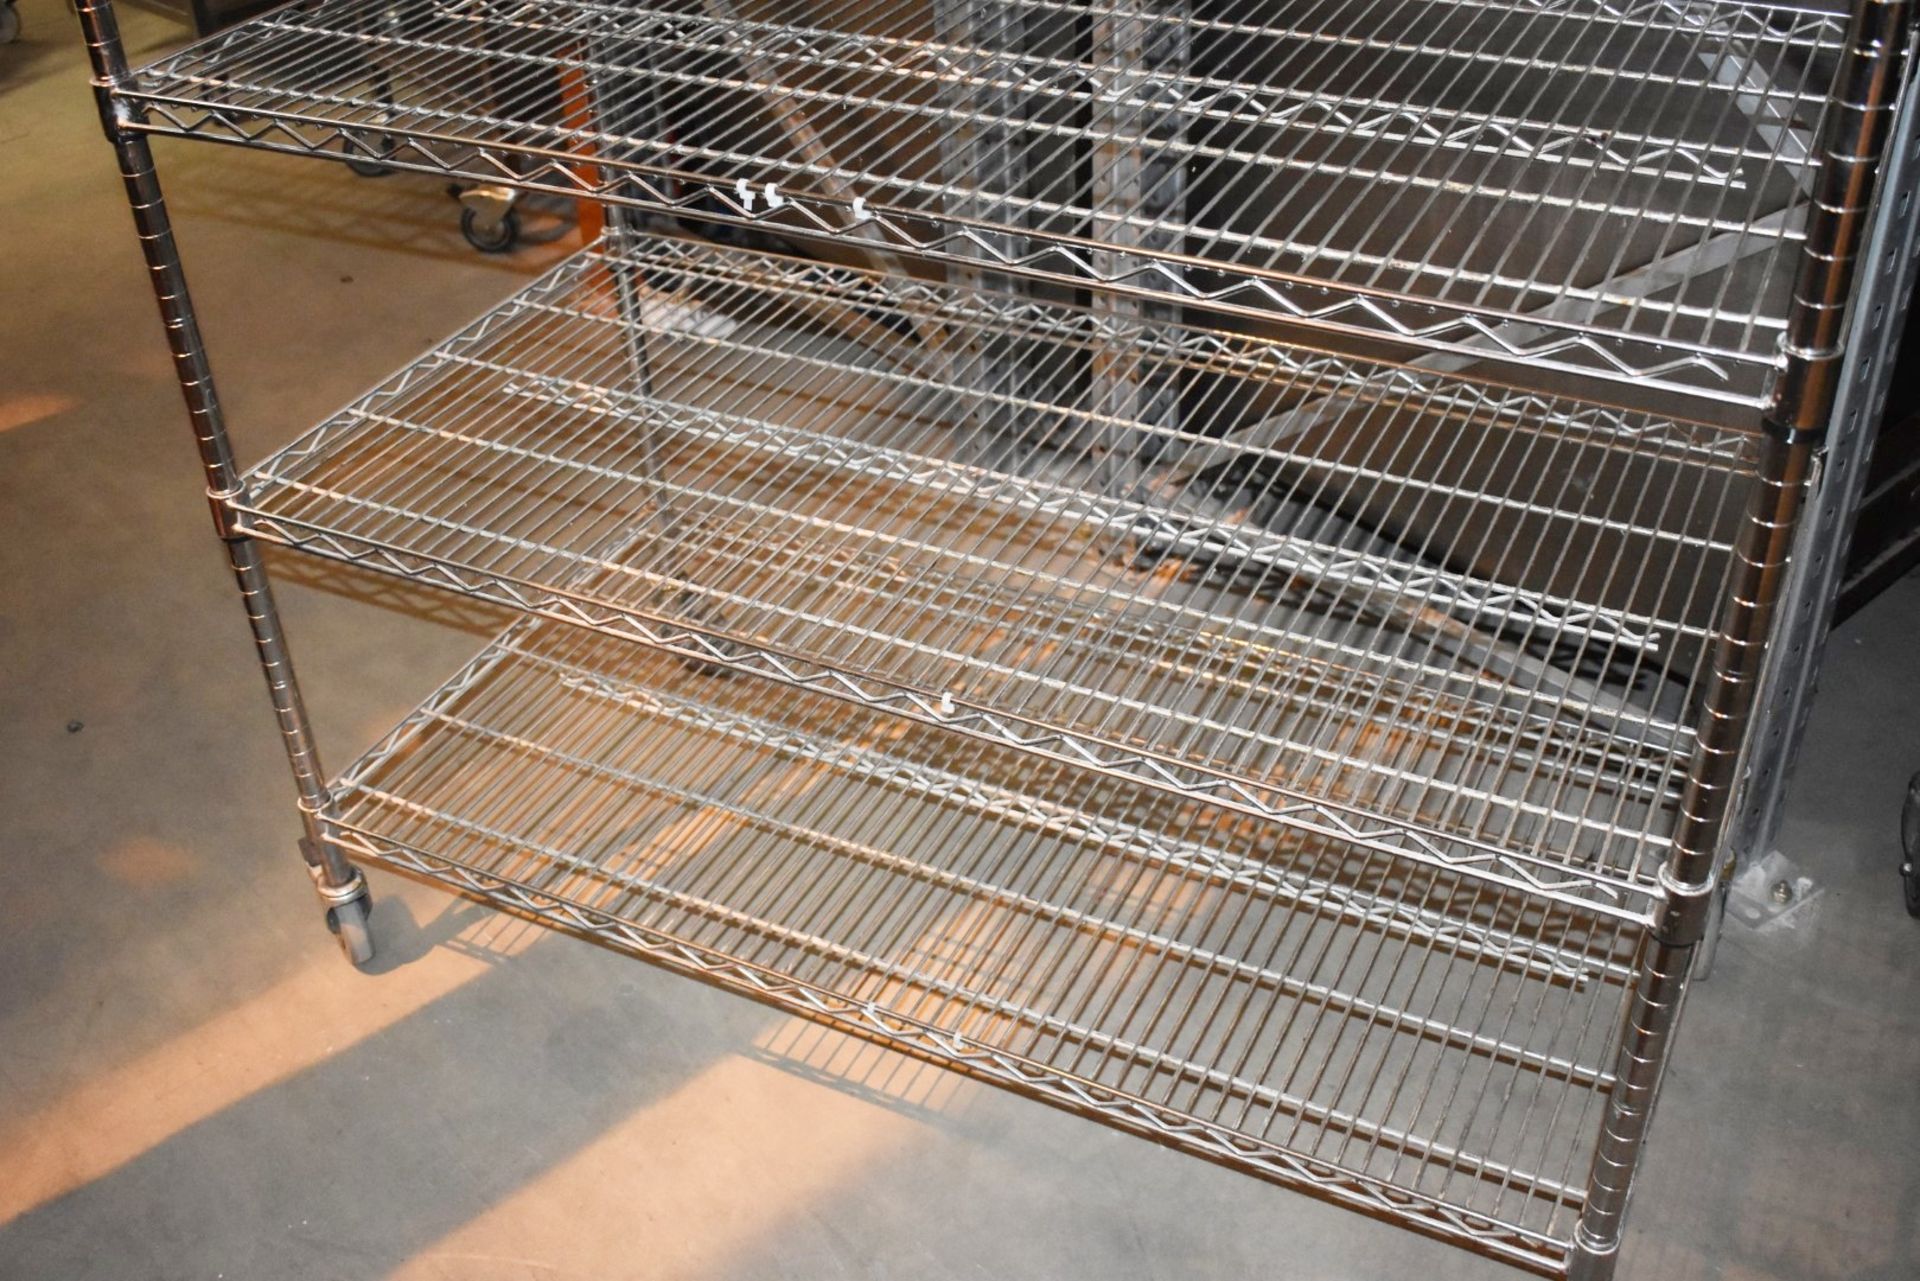 1 x Stainless Steel Commercial Wire Shelving Unit on Wheels - H175 x W120 x D60 cms - CL533 - Ref - Image 2 of 4